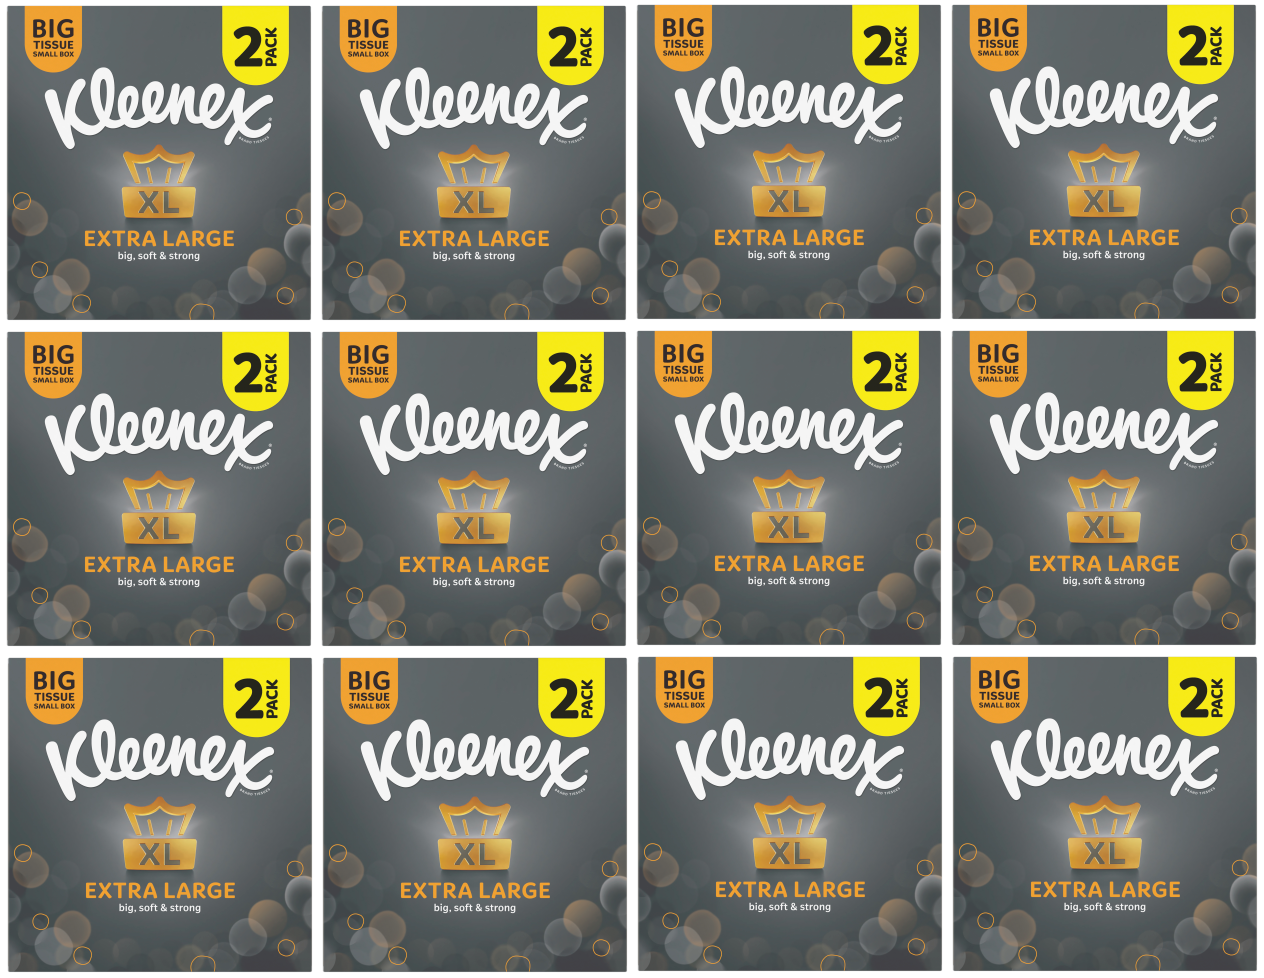 12 X Kleenex Extra Large Tissues Compact 2 PACK